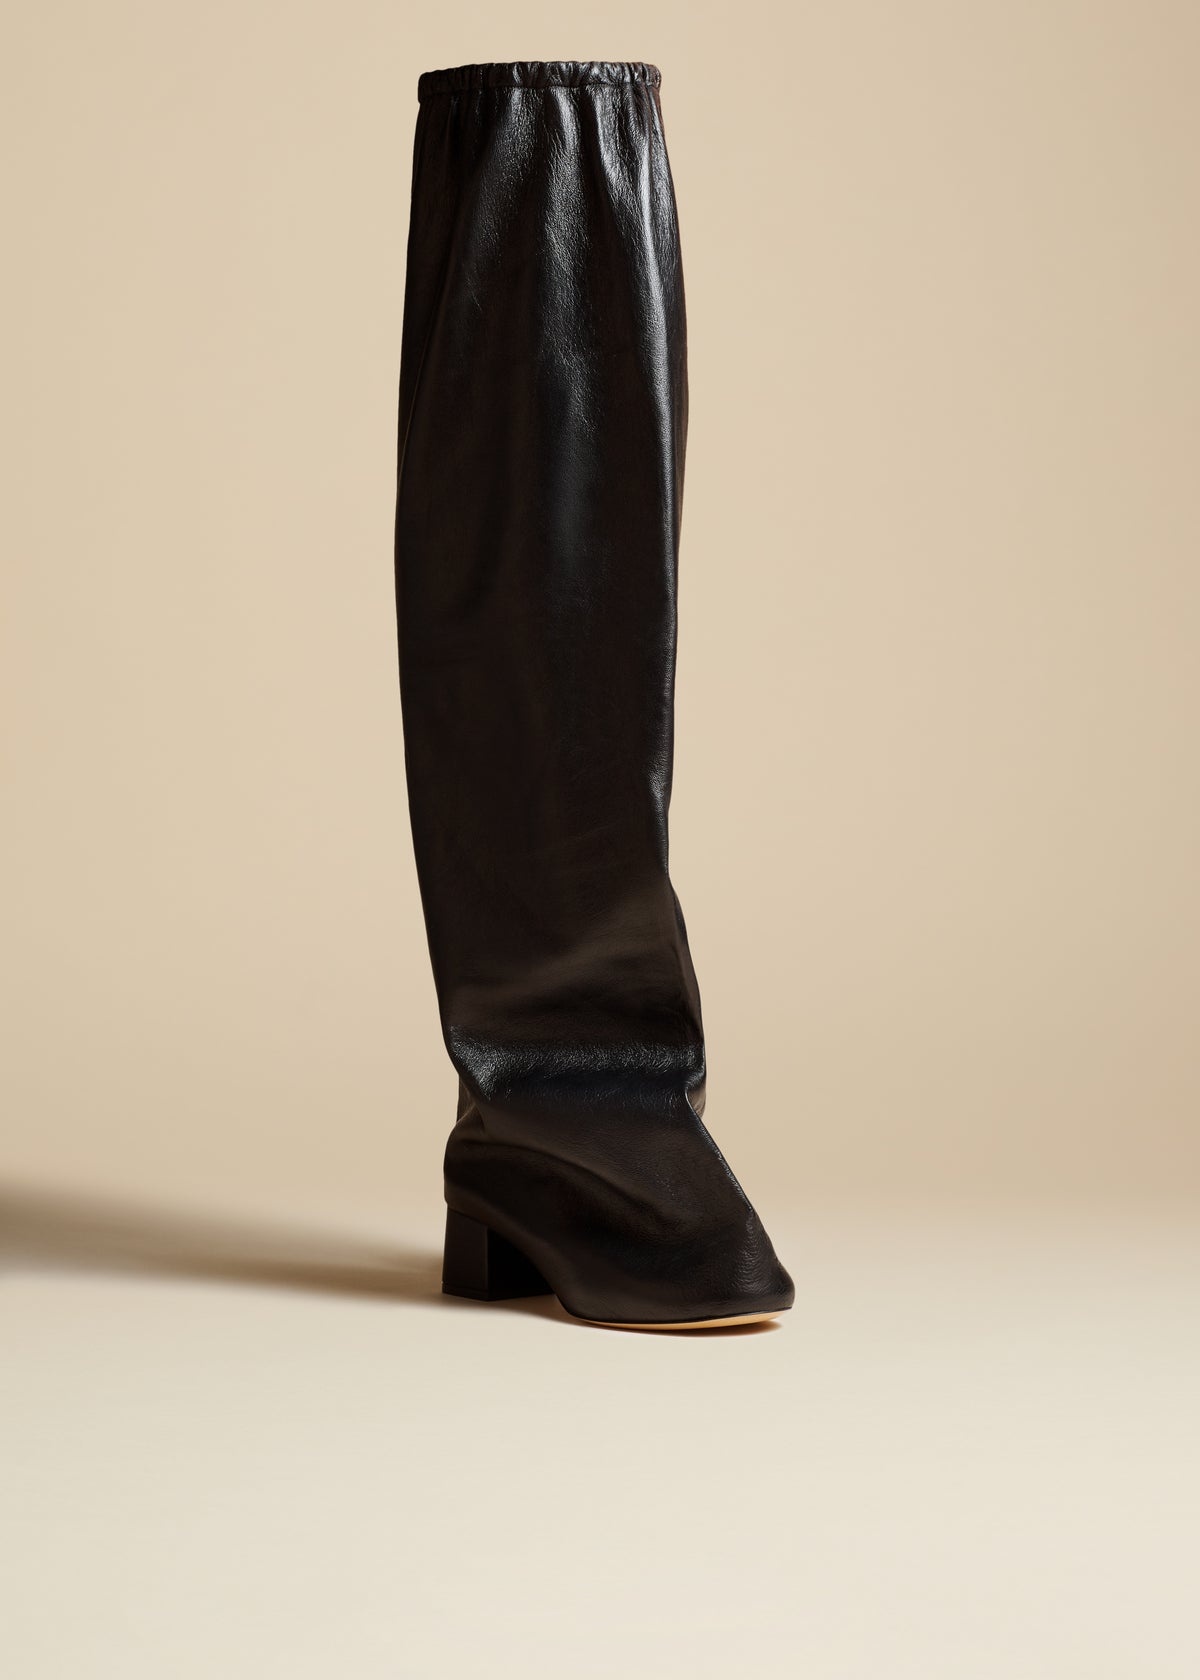 The Bowe Over-the-Knee Boot in Black Leather - 2